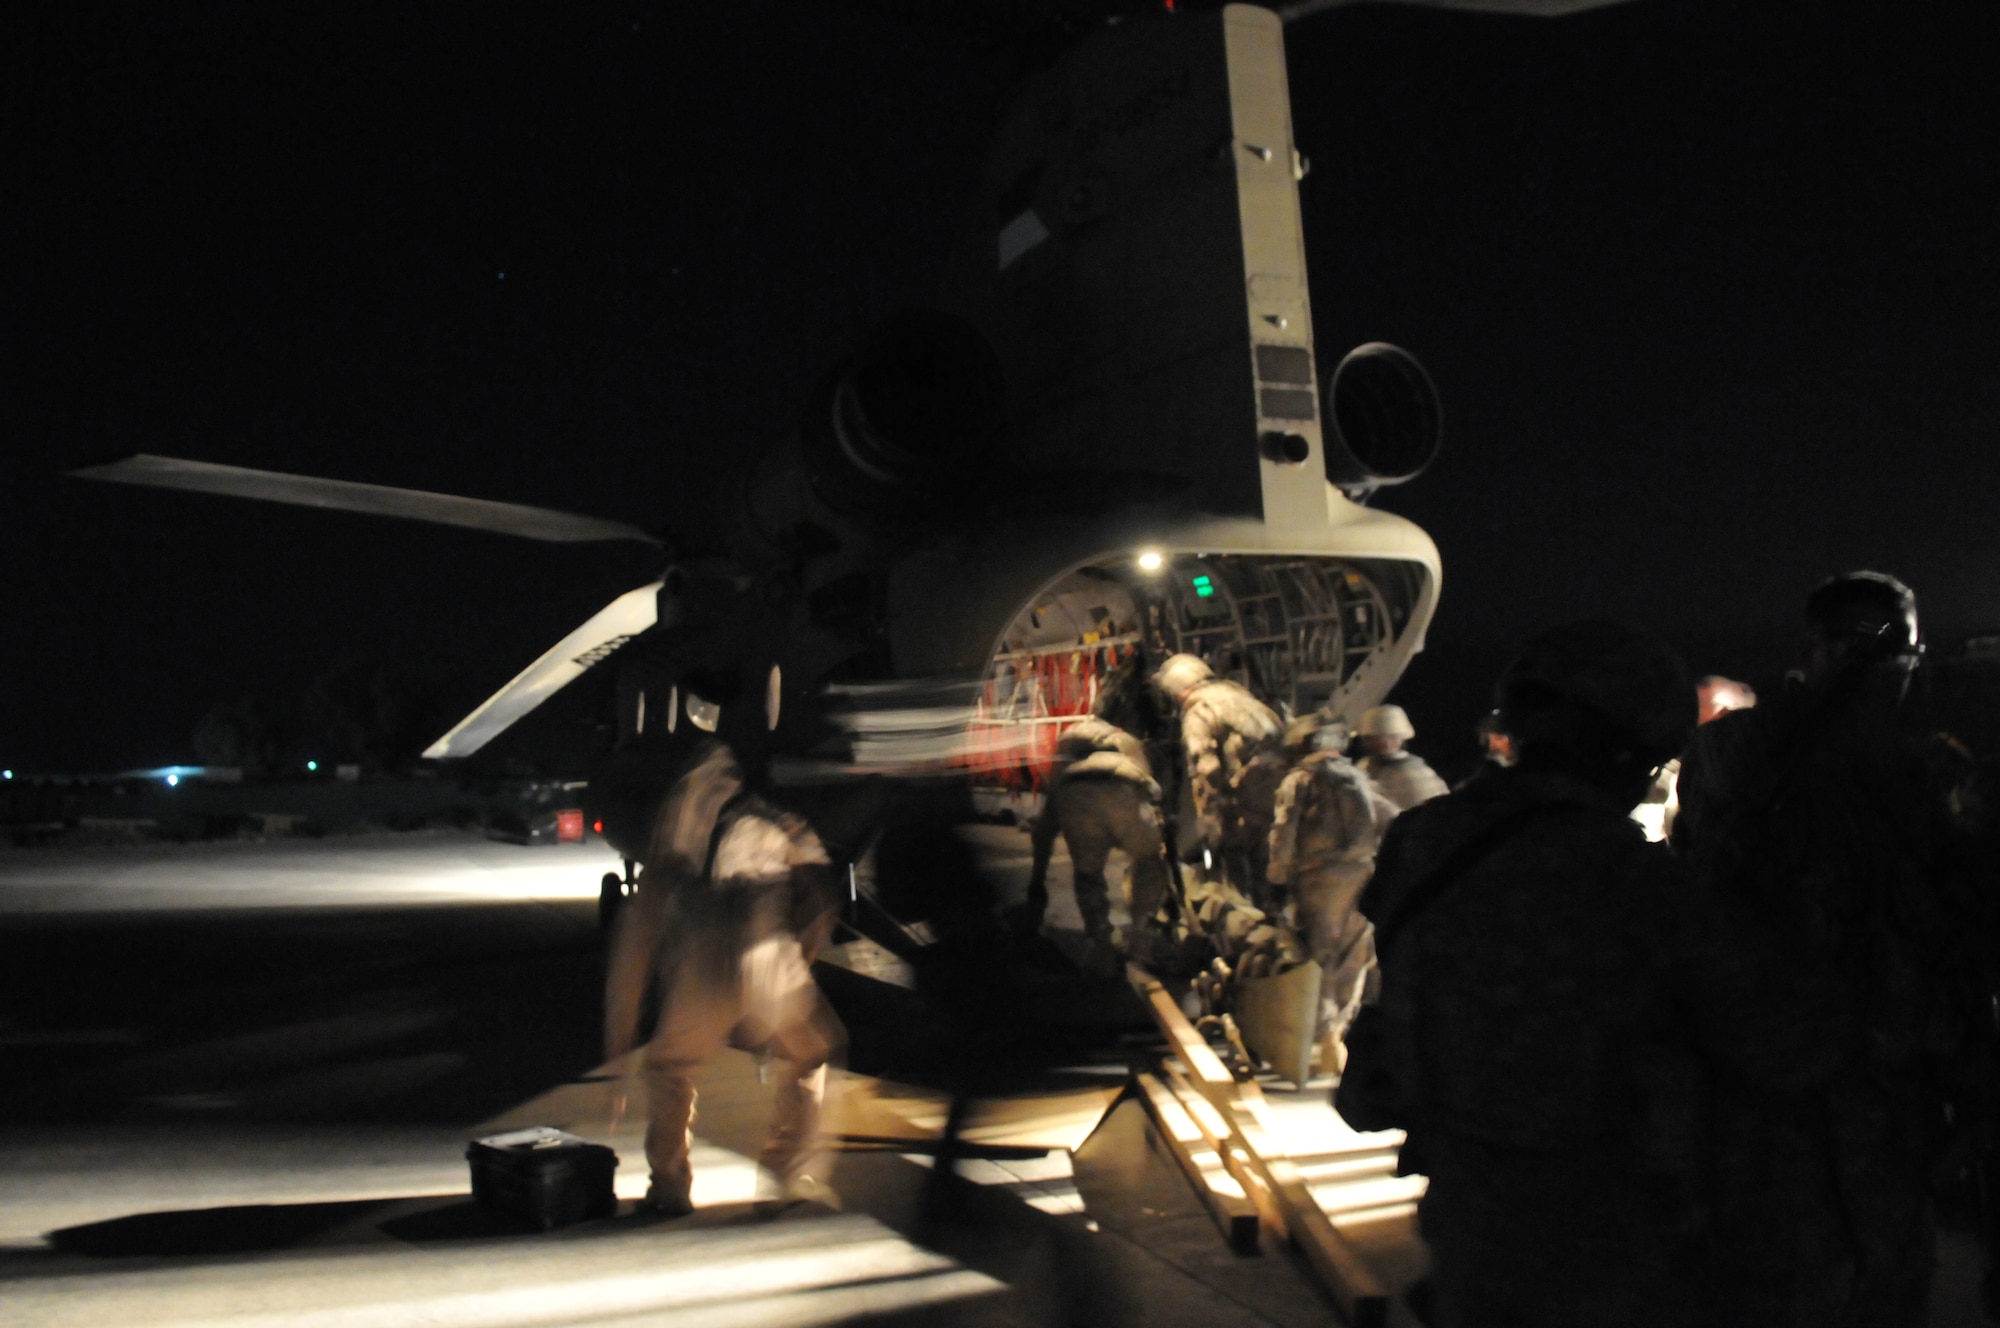 Jalalabad, Afghanistan. Army Pathfinders of Fox Company, 2nd Battalion, 10th Combat Aviation Brigade Fort Drum, NY load onto a CH-47 Chinook to travel to the site of a Afghan Air Force Mi-17 helicopter crash in the Nuristan province, Afghanistan. The Pathfinders are tasked to provide security around the perimeter and disassemble the aircraft so it can be sling loaded by a CH-47 Chinook and taken to an airbase. Photo by Tech Sgt. Brian E. Christiansen.